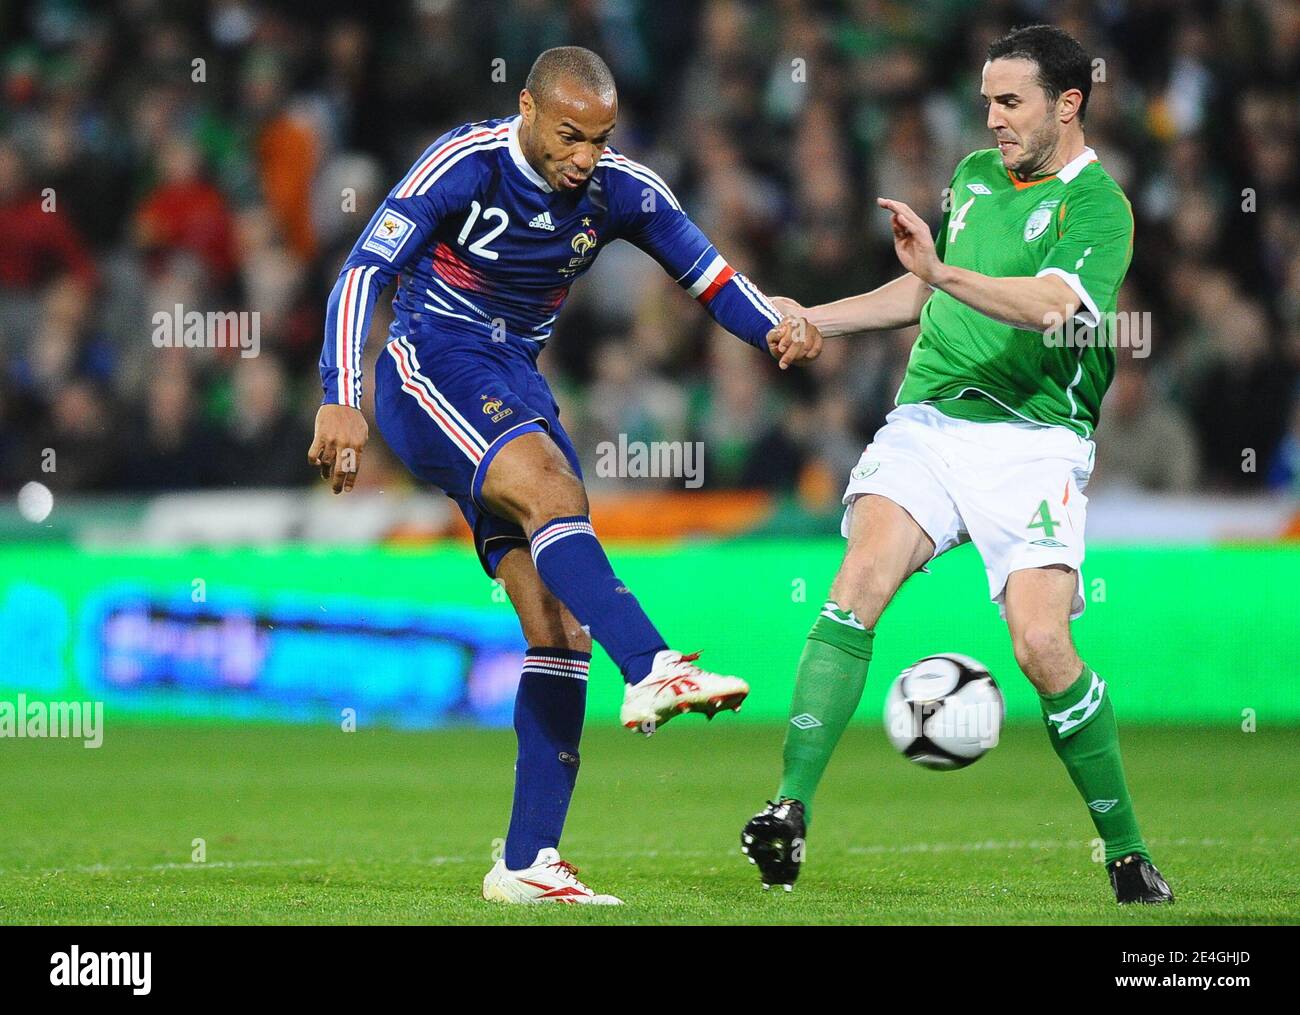 France's Thierry Henry takes a kick in front of Ireland's John O'Shea during the World Cup 2010 Qualifying Play off soccer match, Ireland vs France at Croke Park stadium in Dublin, Ireland on November 14, 2009. France won 1-0. Photo by Steeve McMay/ABACAPRESS.COM Stock Photo